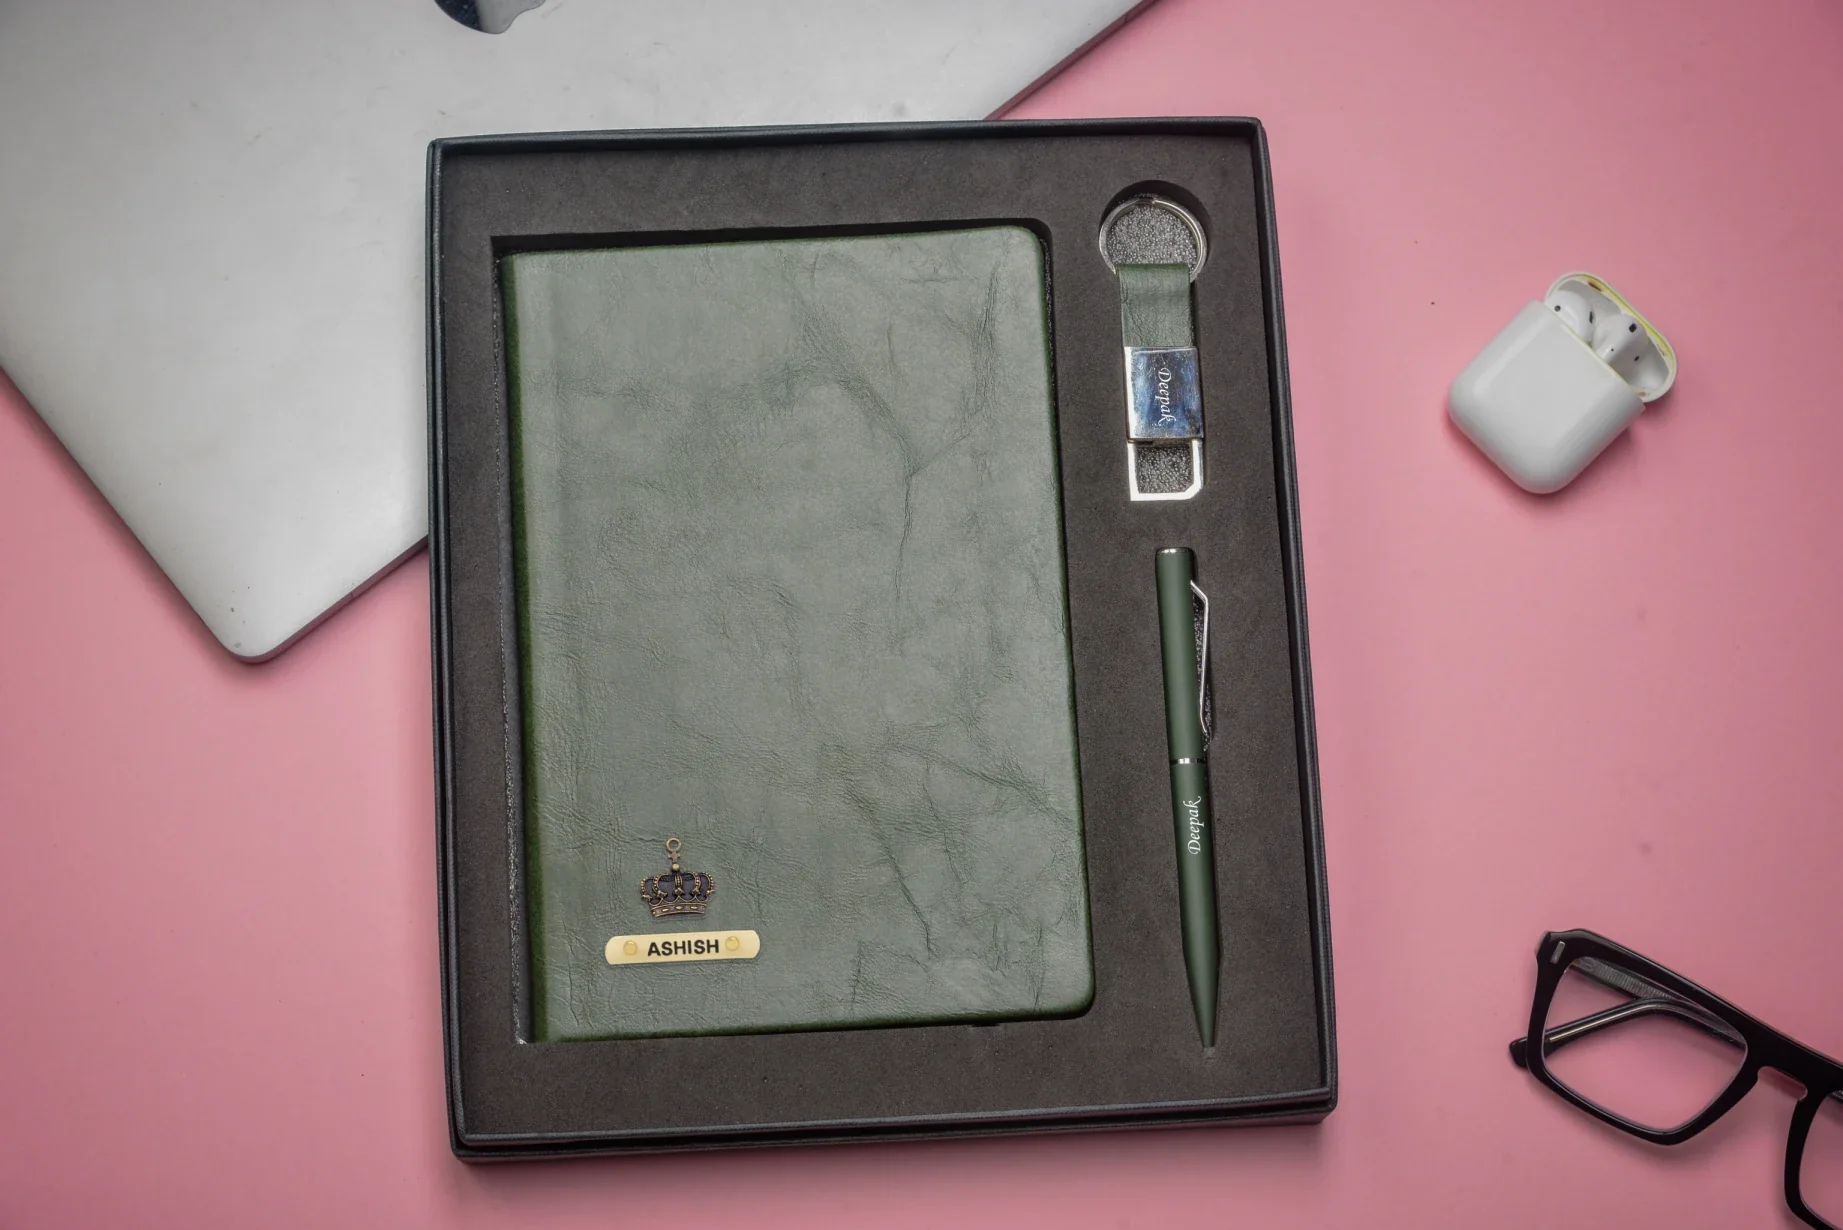 "Expand your horizons and explore your innermost thoughts with our introspective corporate duo. Our thought-provoking diary, precise pen, and reflective keychain will help you grow and evolve."